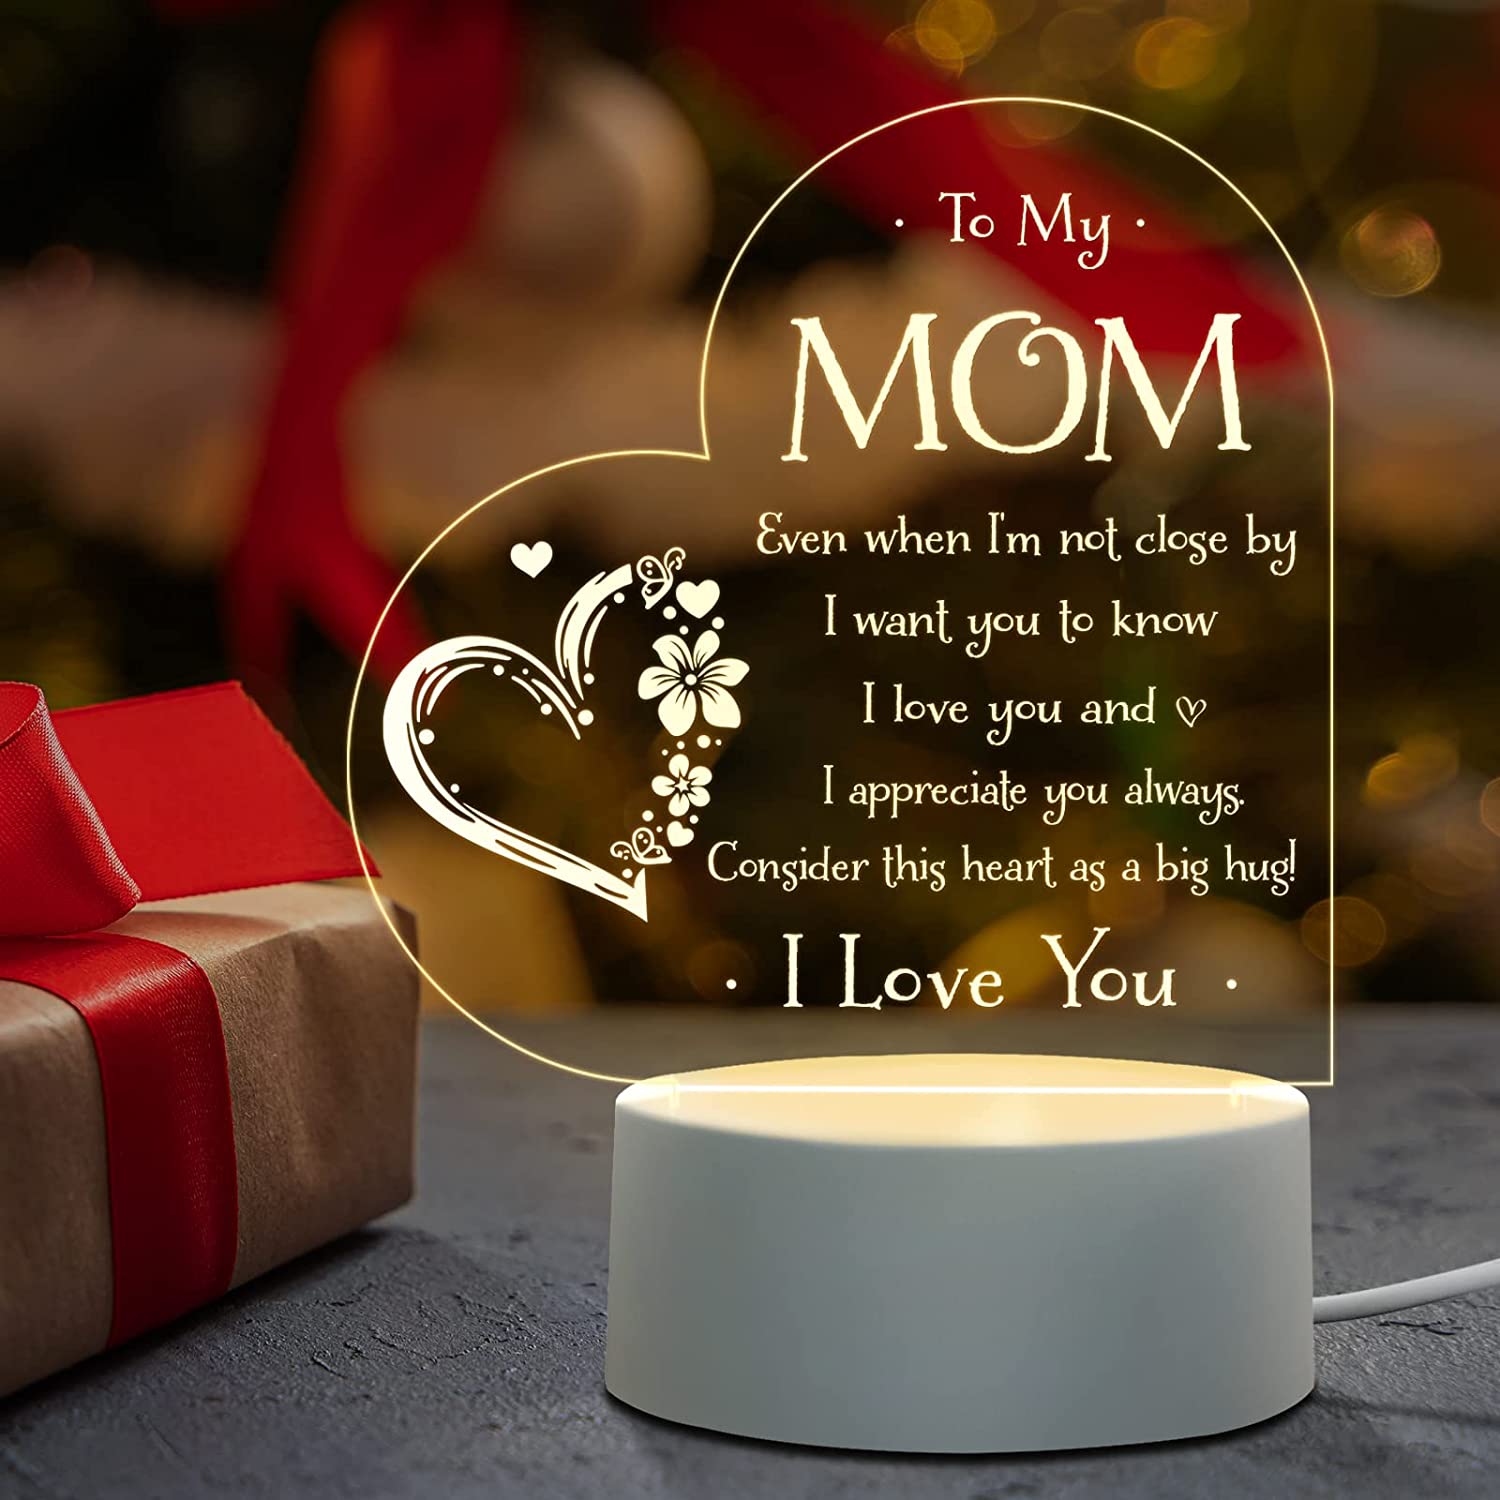 Gifts for Mom, Unique for Mother from Daughter Son Kids, Birthday Gifts for  Mom from Daughter or Son, Mom Love Heart Gifts for Christmas